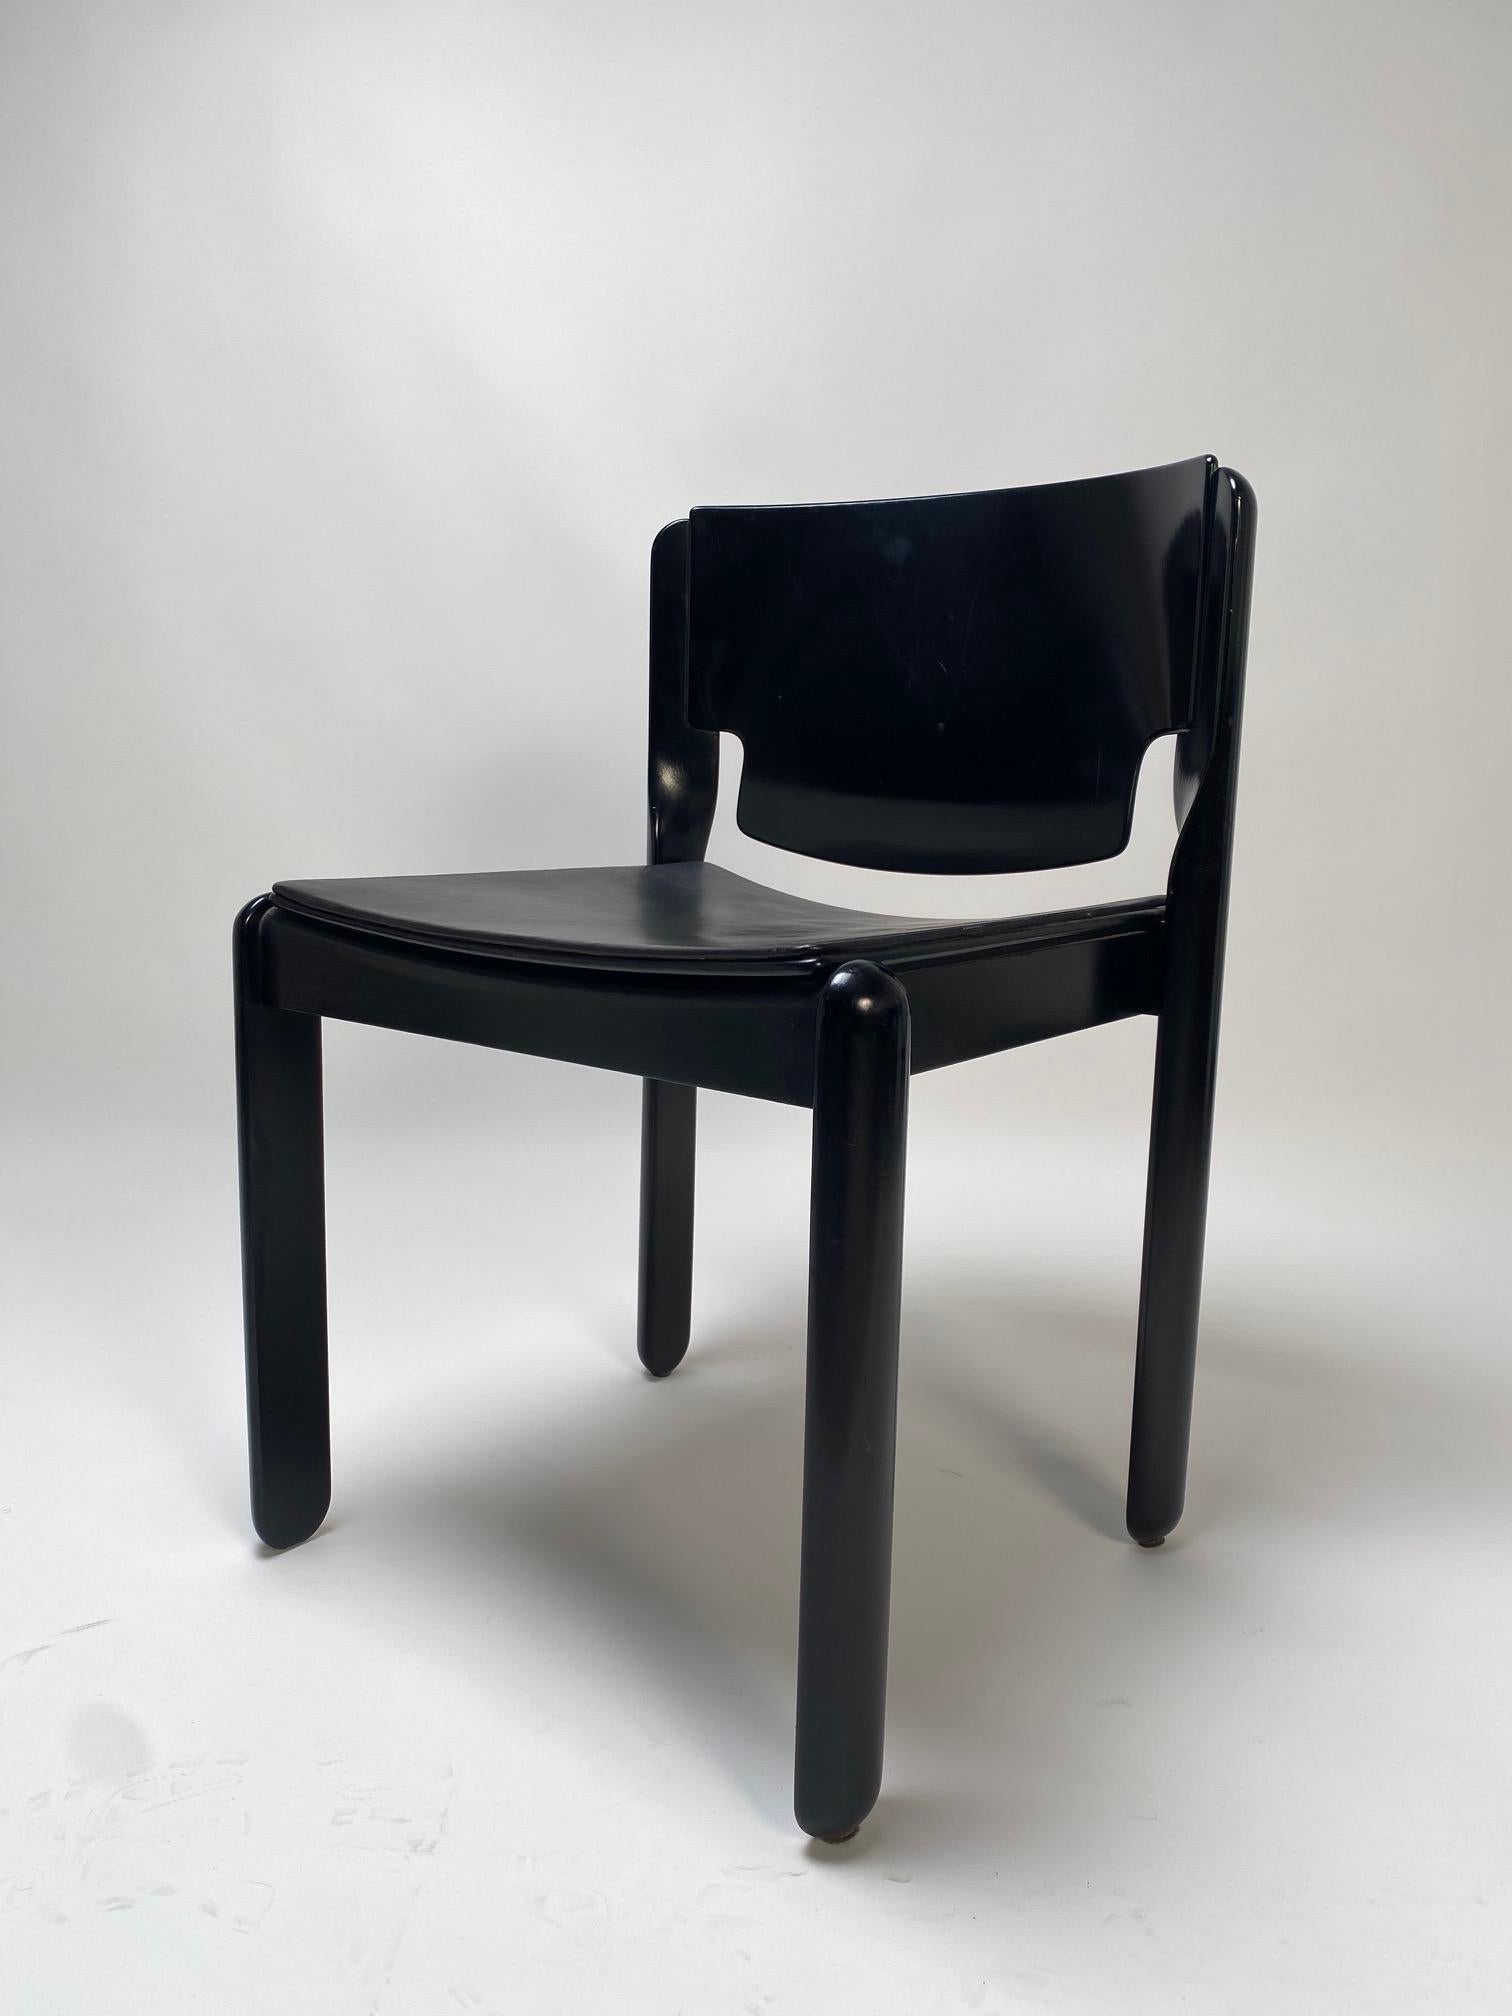 An authentic icon of Made in Italy and of the best applied design, the 122 chairs are the work of the famous architect and designer Vico Magistretti.

Comfortable and very elegant, in the total black version that we propose here they adapt